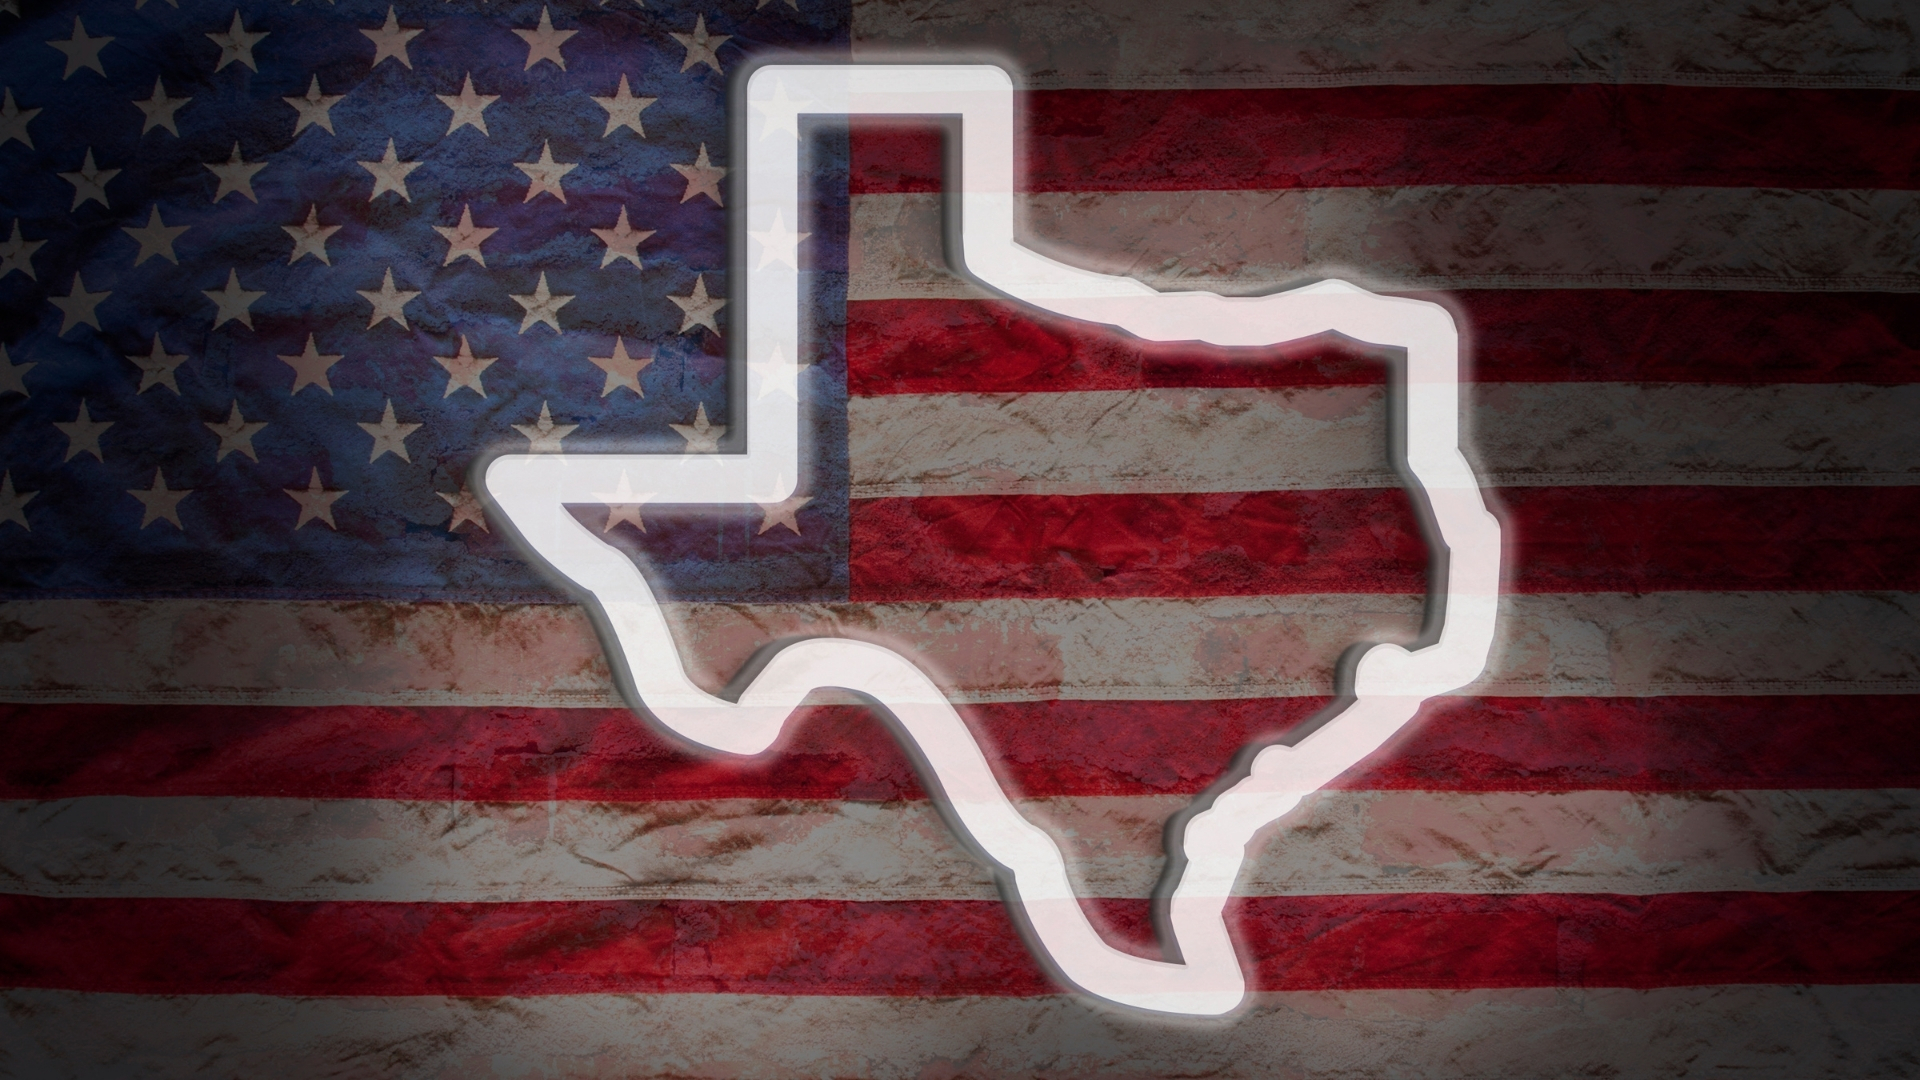 1920x1080 Texas wallpaper Texas phone wallpapers, Texas background 24wallpapers